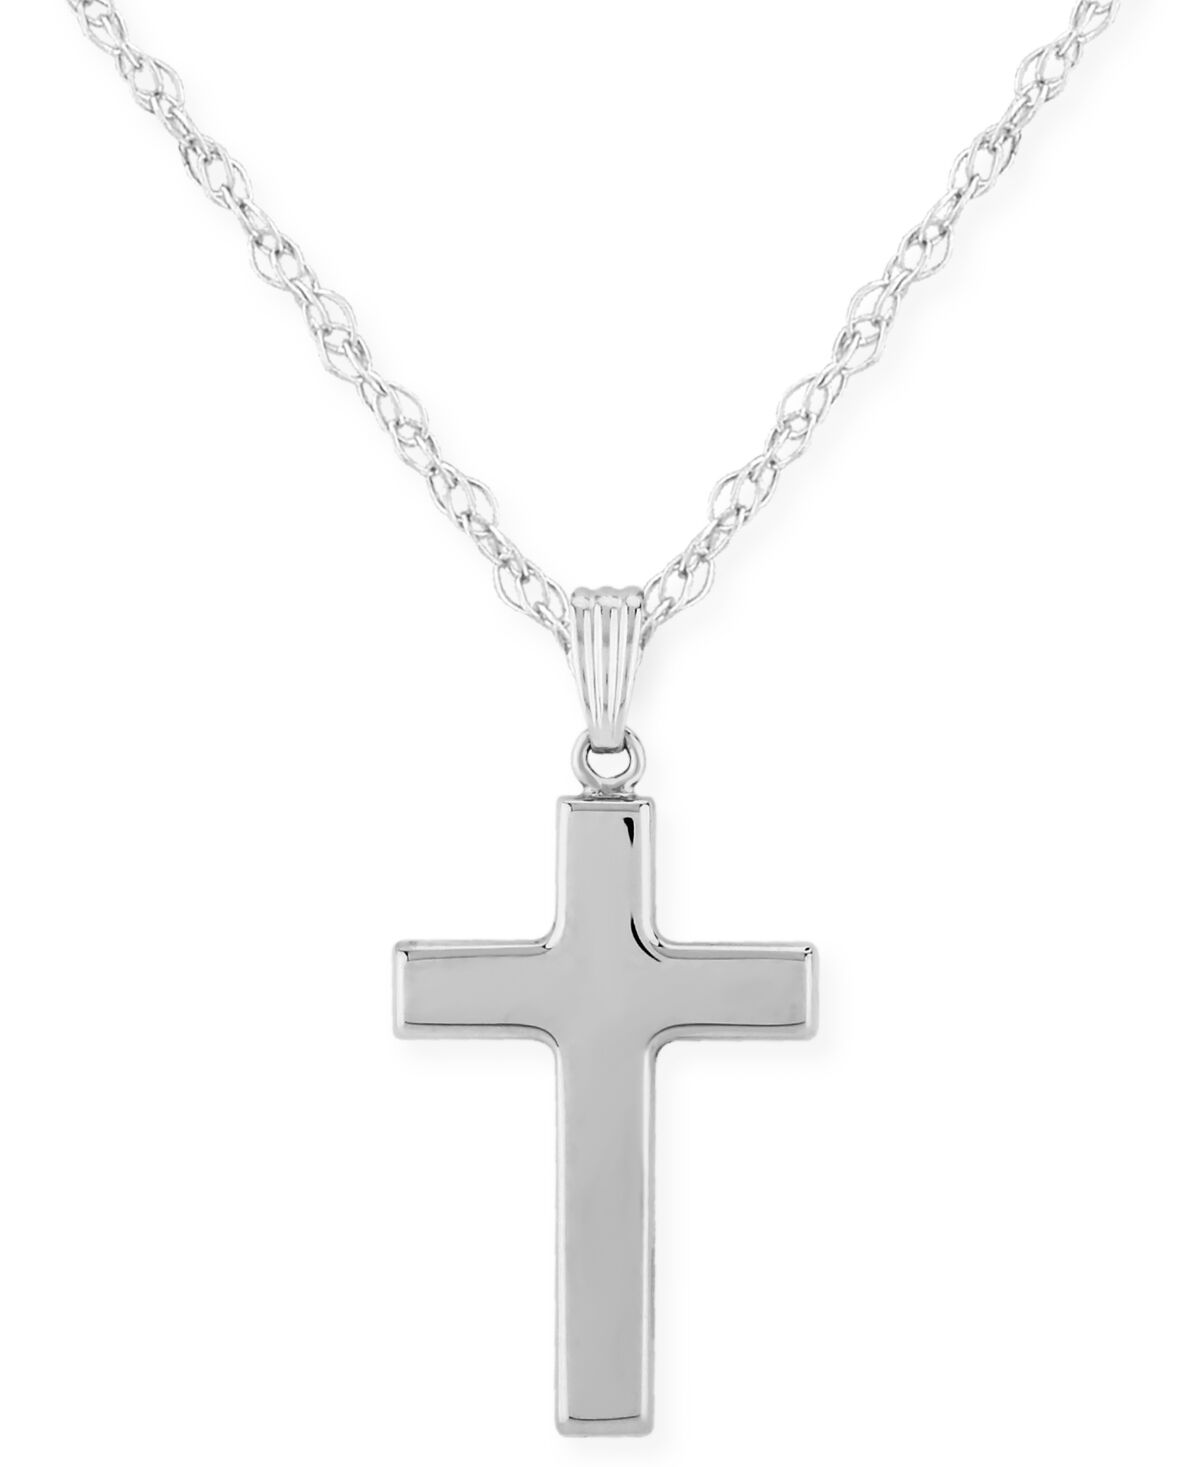 Macy's Flat Cross Necklace Set in 14k White Or Yellow Gold - White Gold